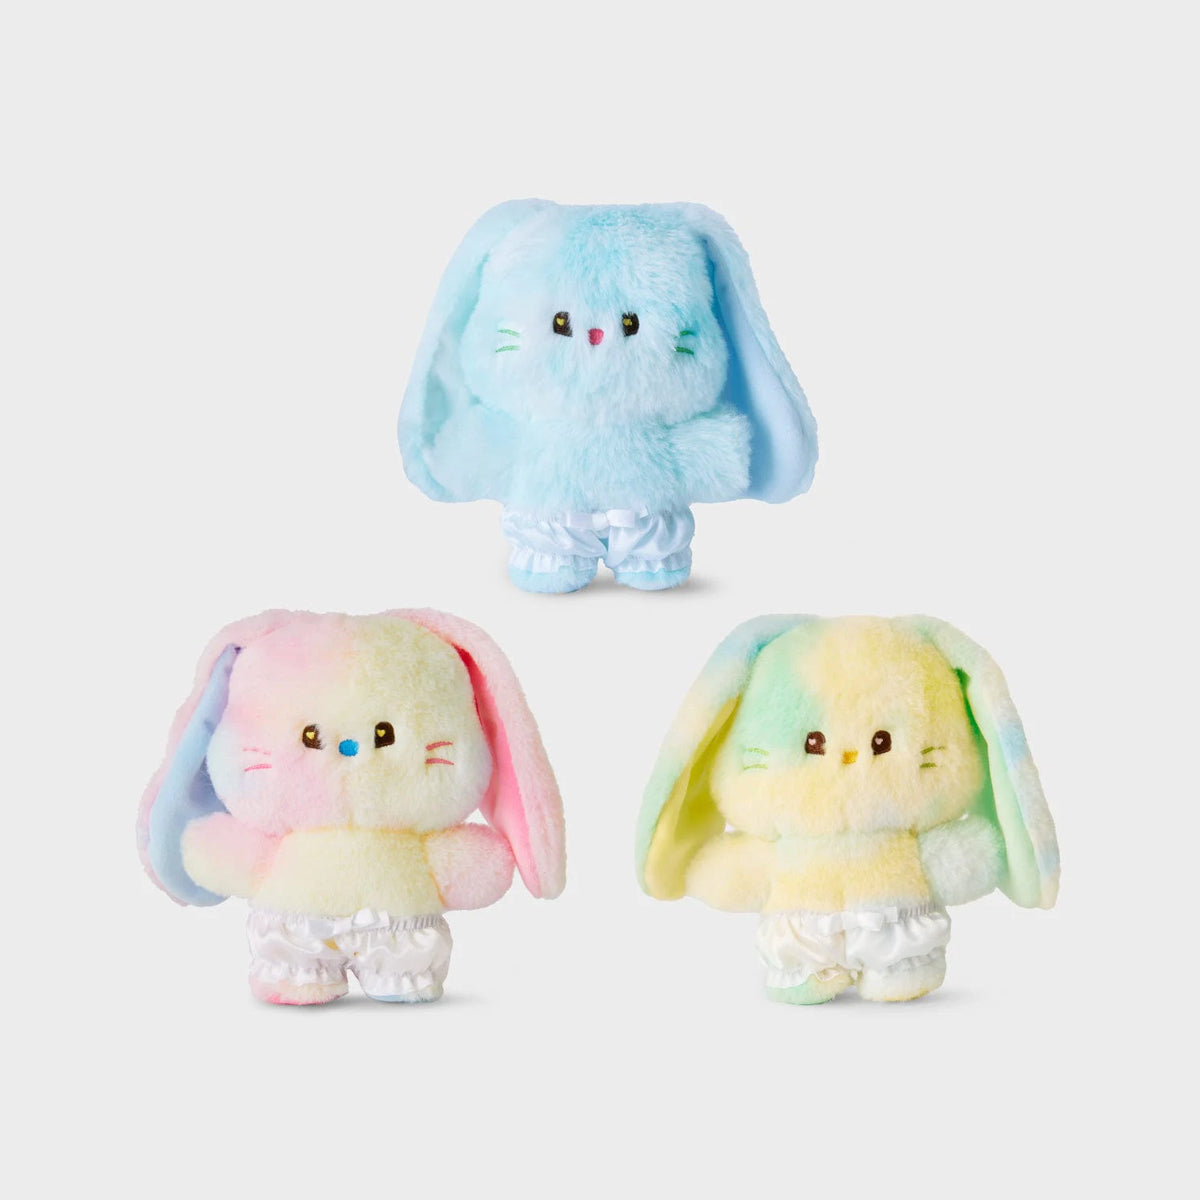 NewJeans - OFFICIAL MERCH [BUNINI COSTUME PLUSH] - PINK MIXED